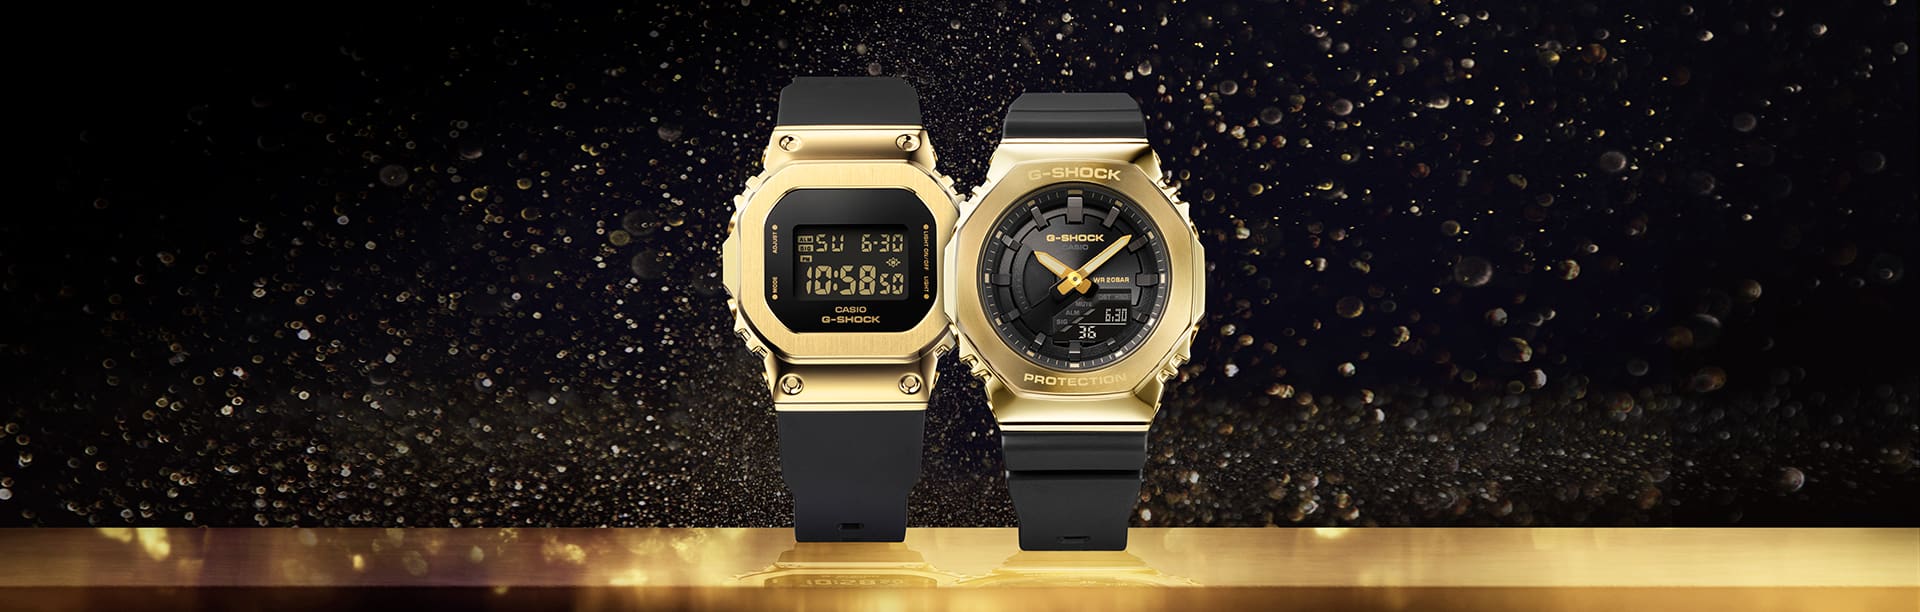 GM-2100GB-S2100GB Gold Watches with black bands on a reflective gold surface with a black background